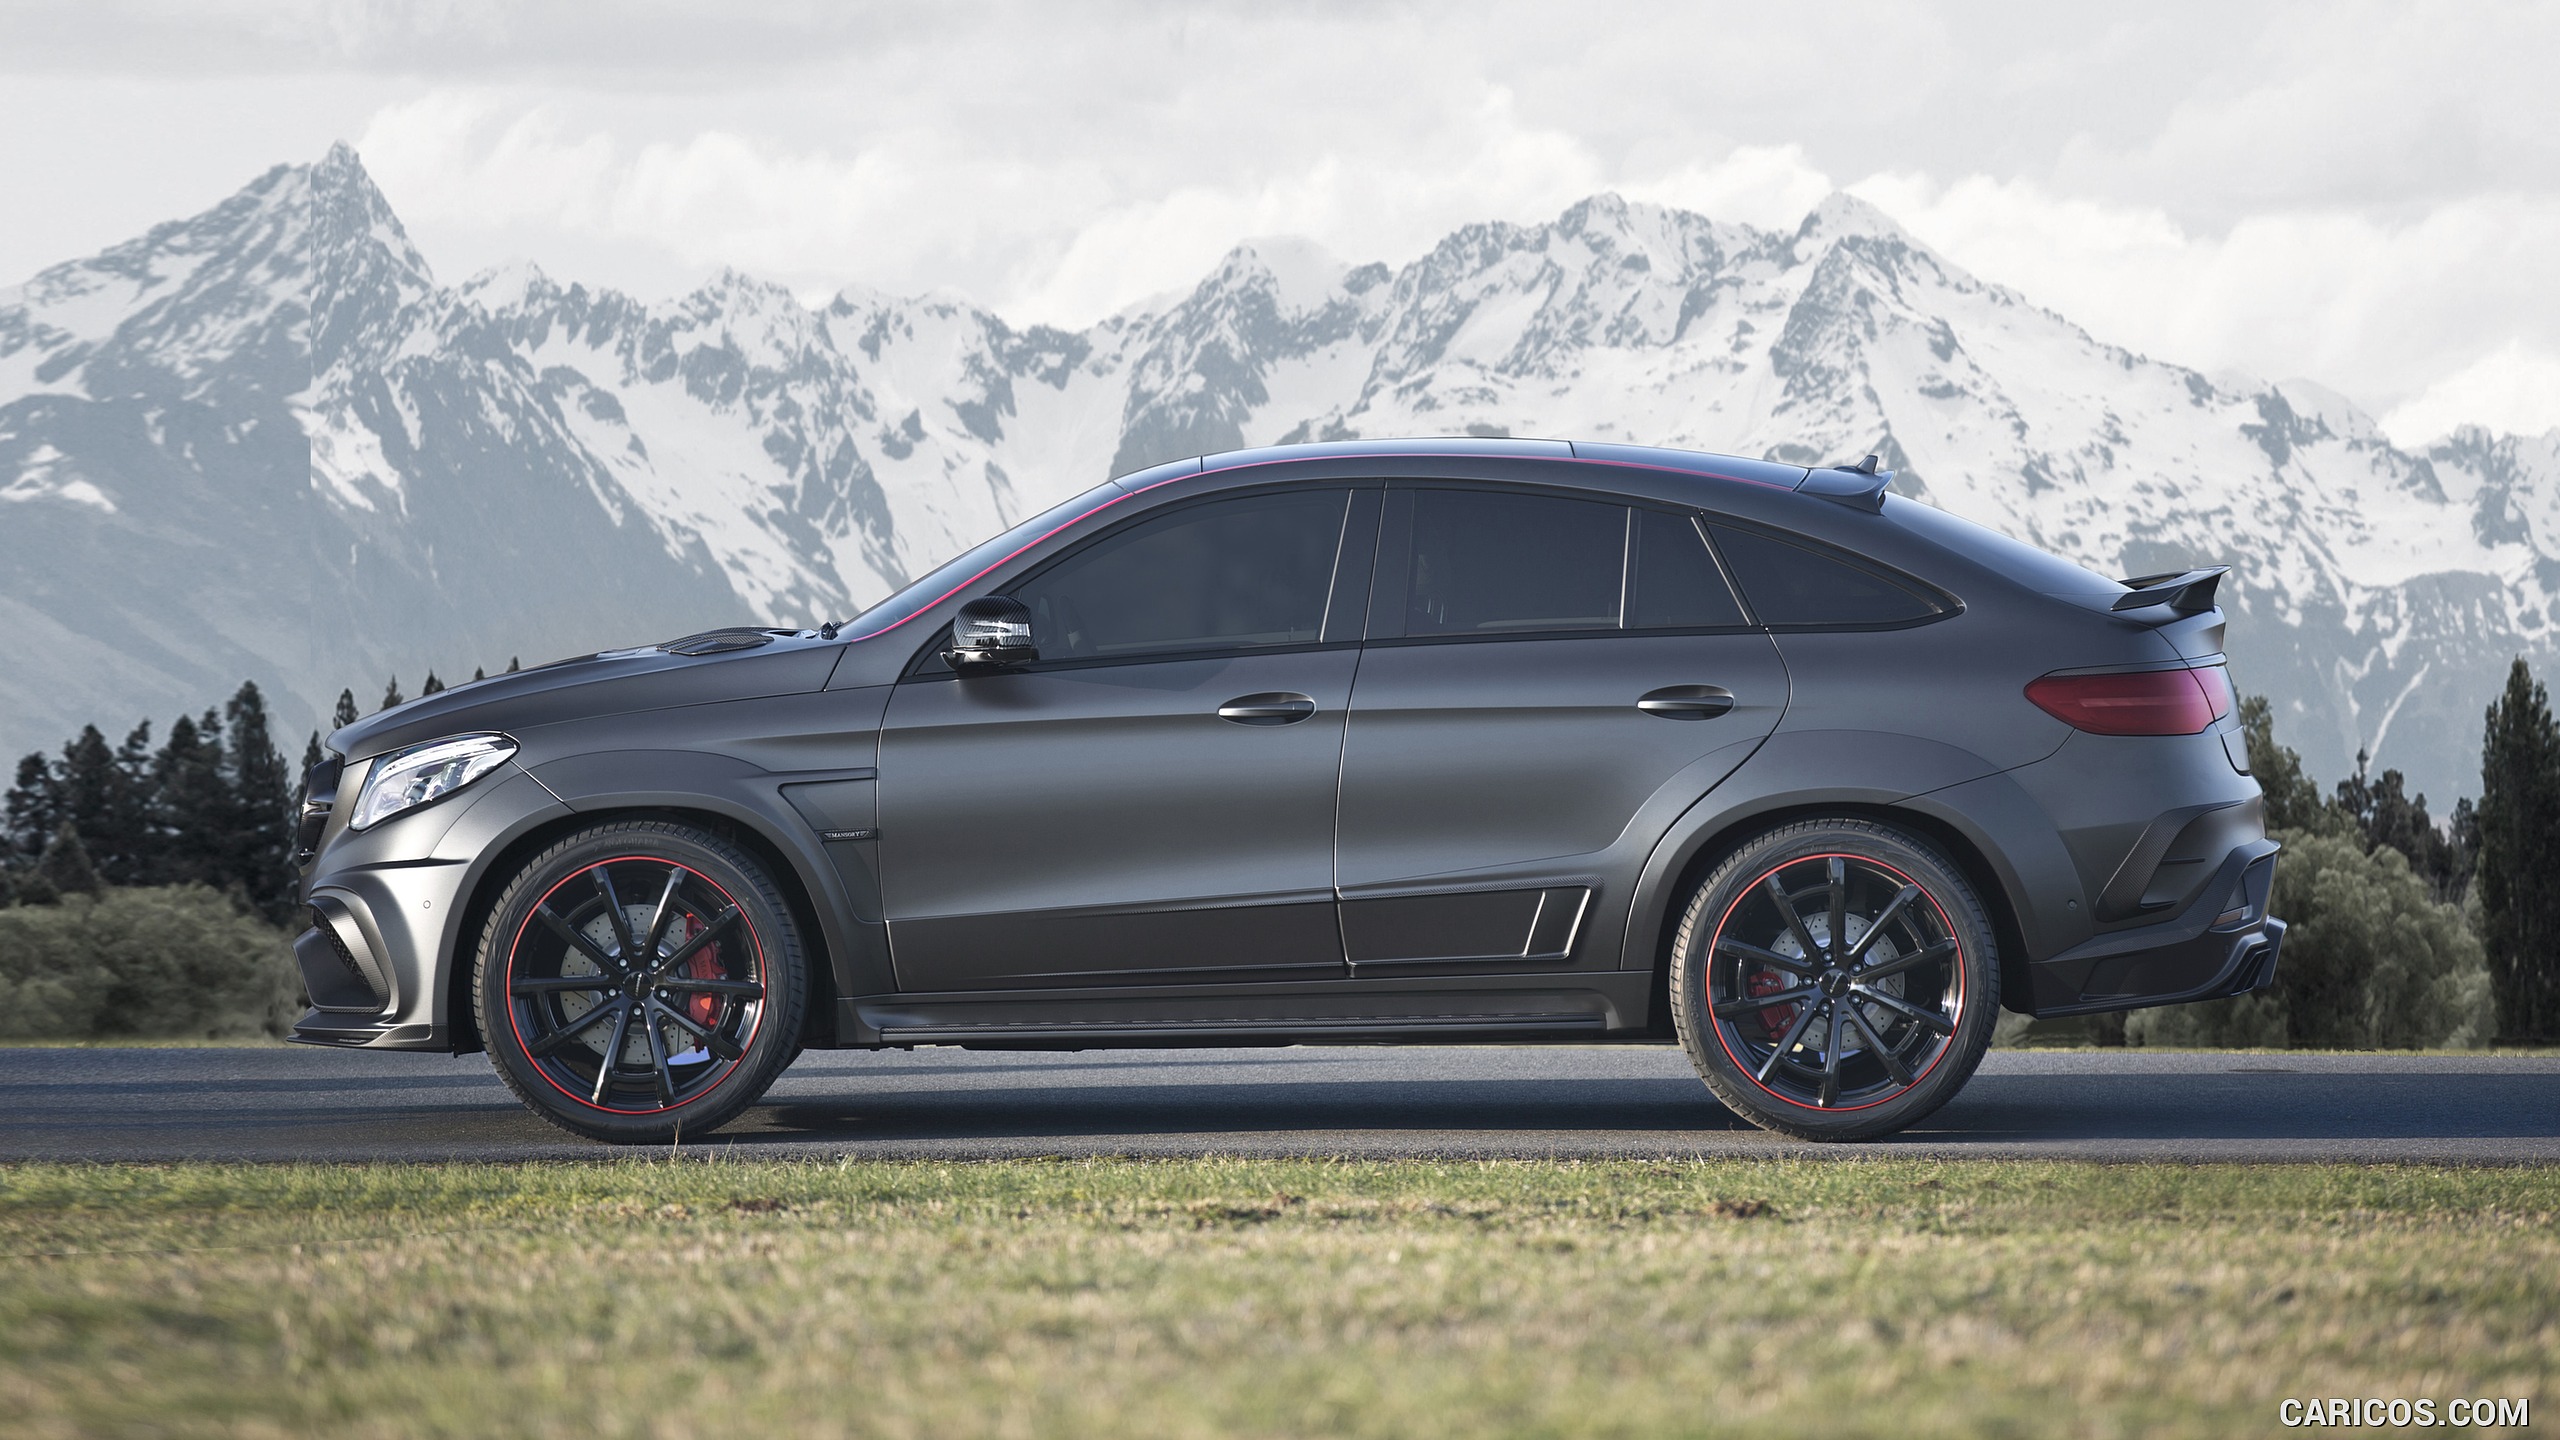 2016 MANSORY Mercedes-AMG GLE 63 Coupe - Side, #3 of 8